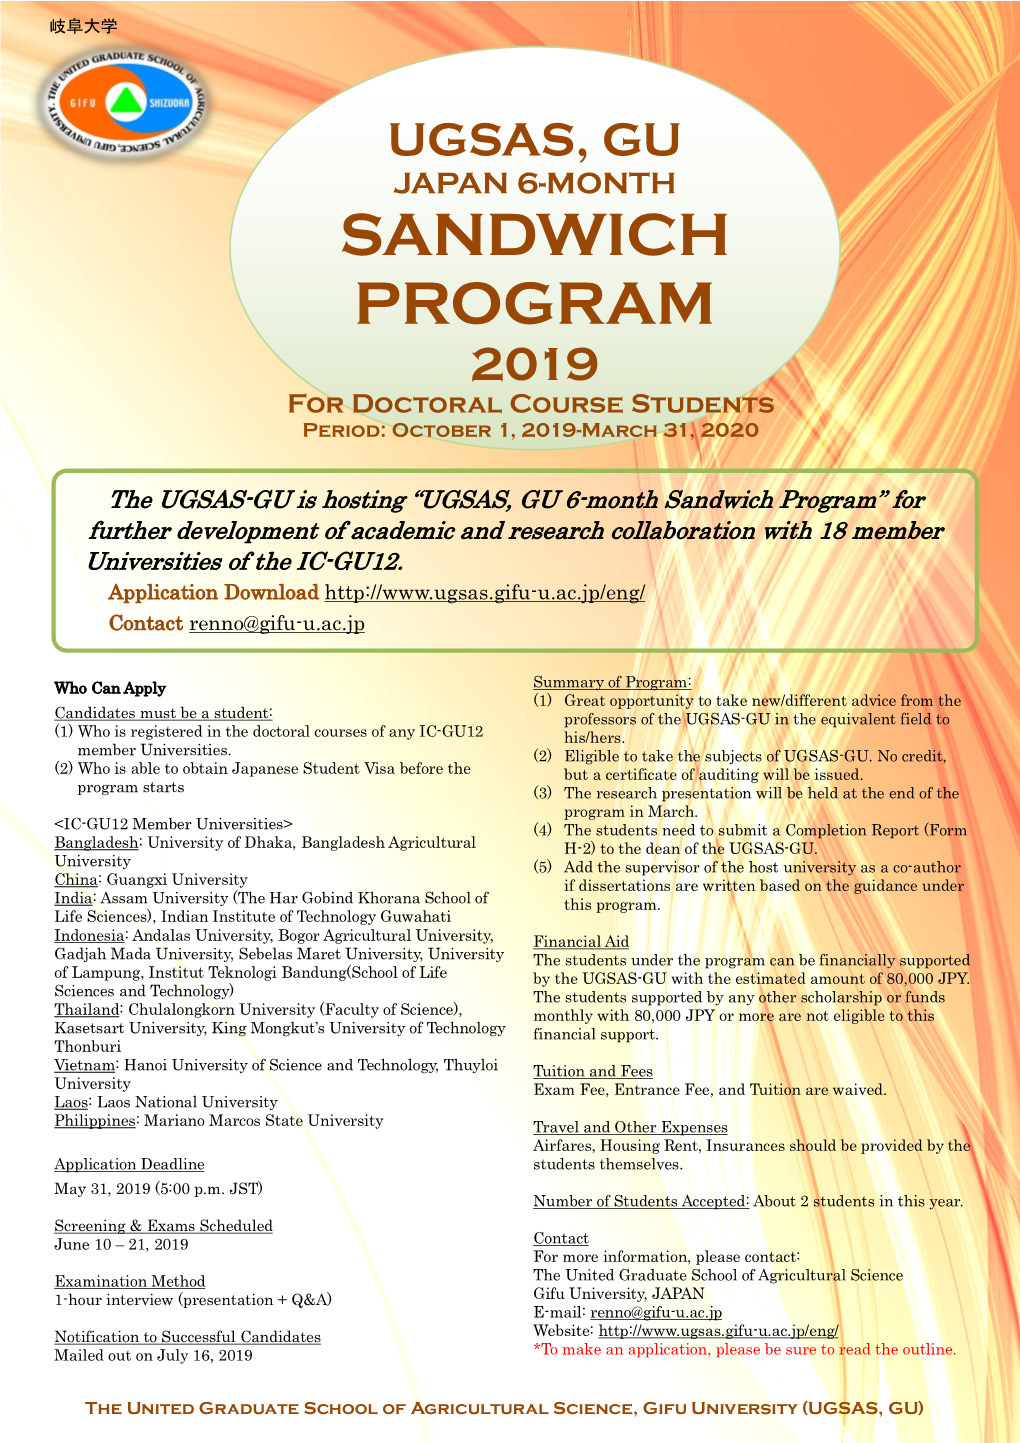 SANDWICH PROGRAM 2019 for Doctoral Course Students Period: October 1, 2019-March 31, 2020